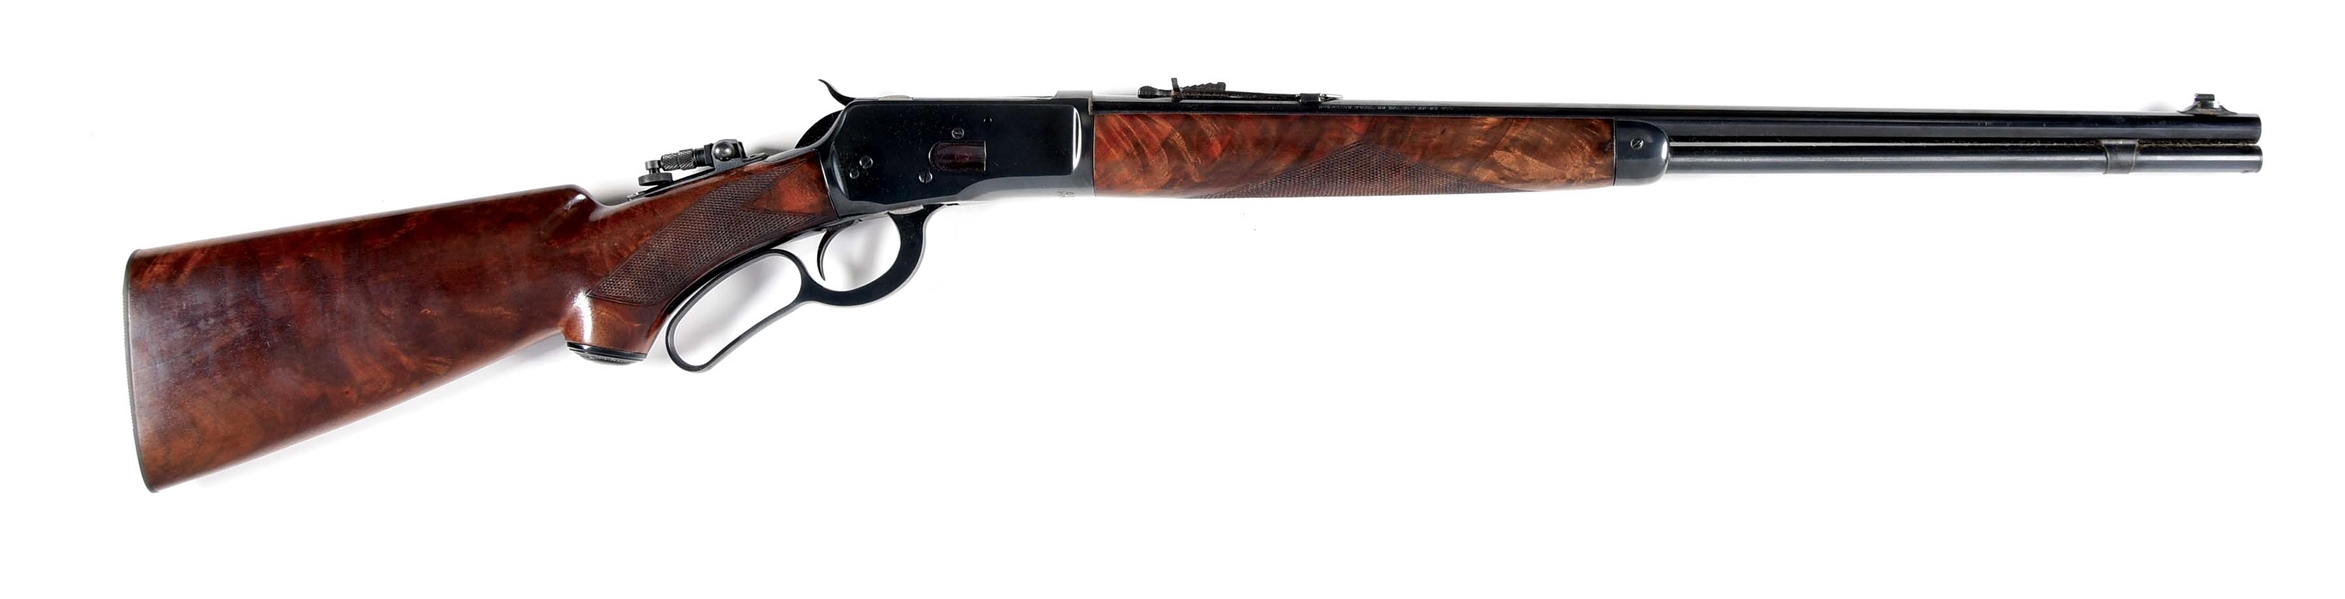 (M) BROWNING MODEL 53 DELUXE LEVER-ACTION RIFLE.